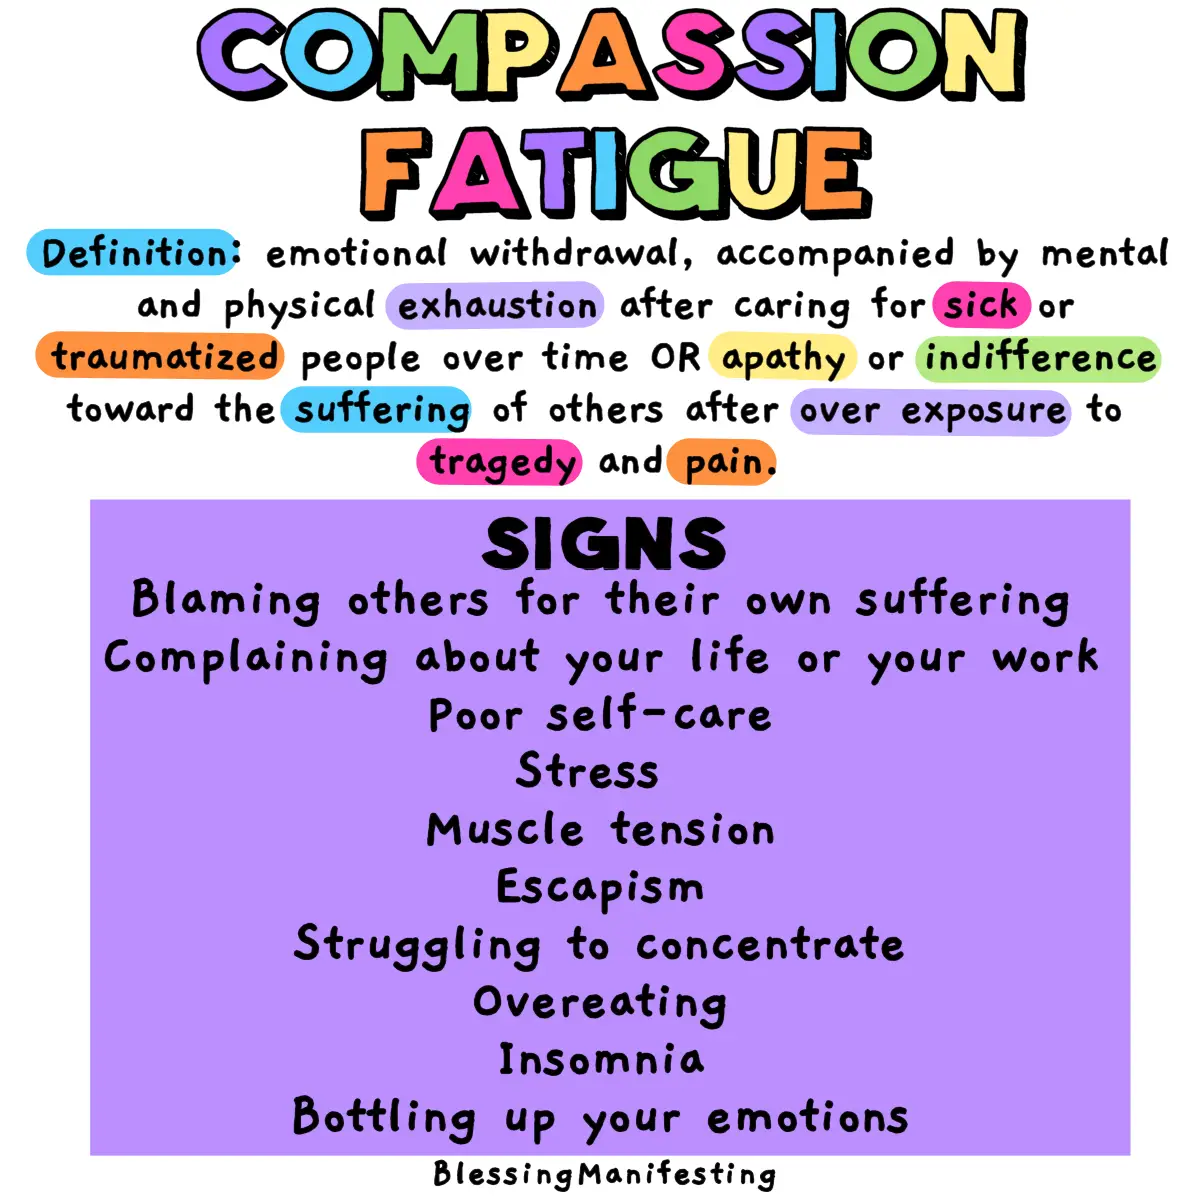 How to Combat Compassion Fatigue in 2020